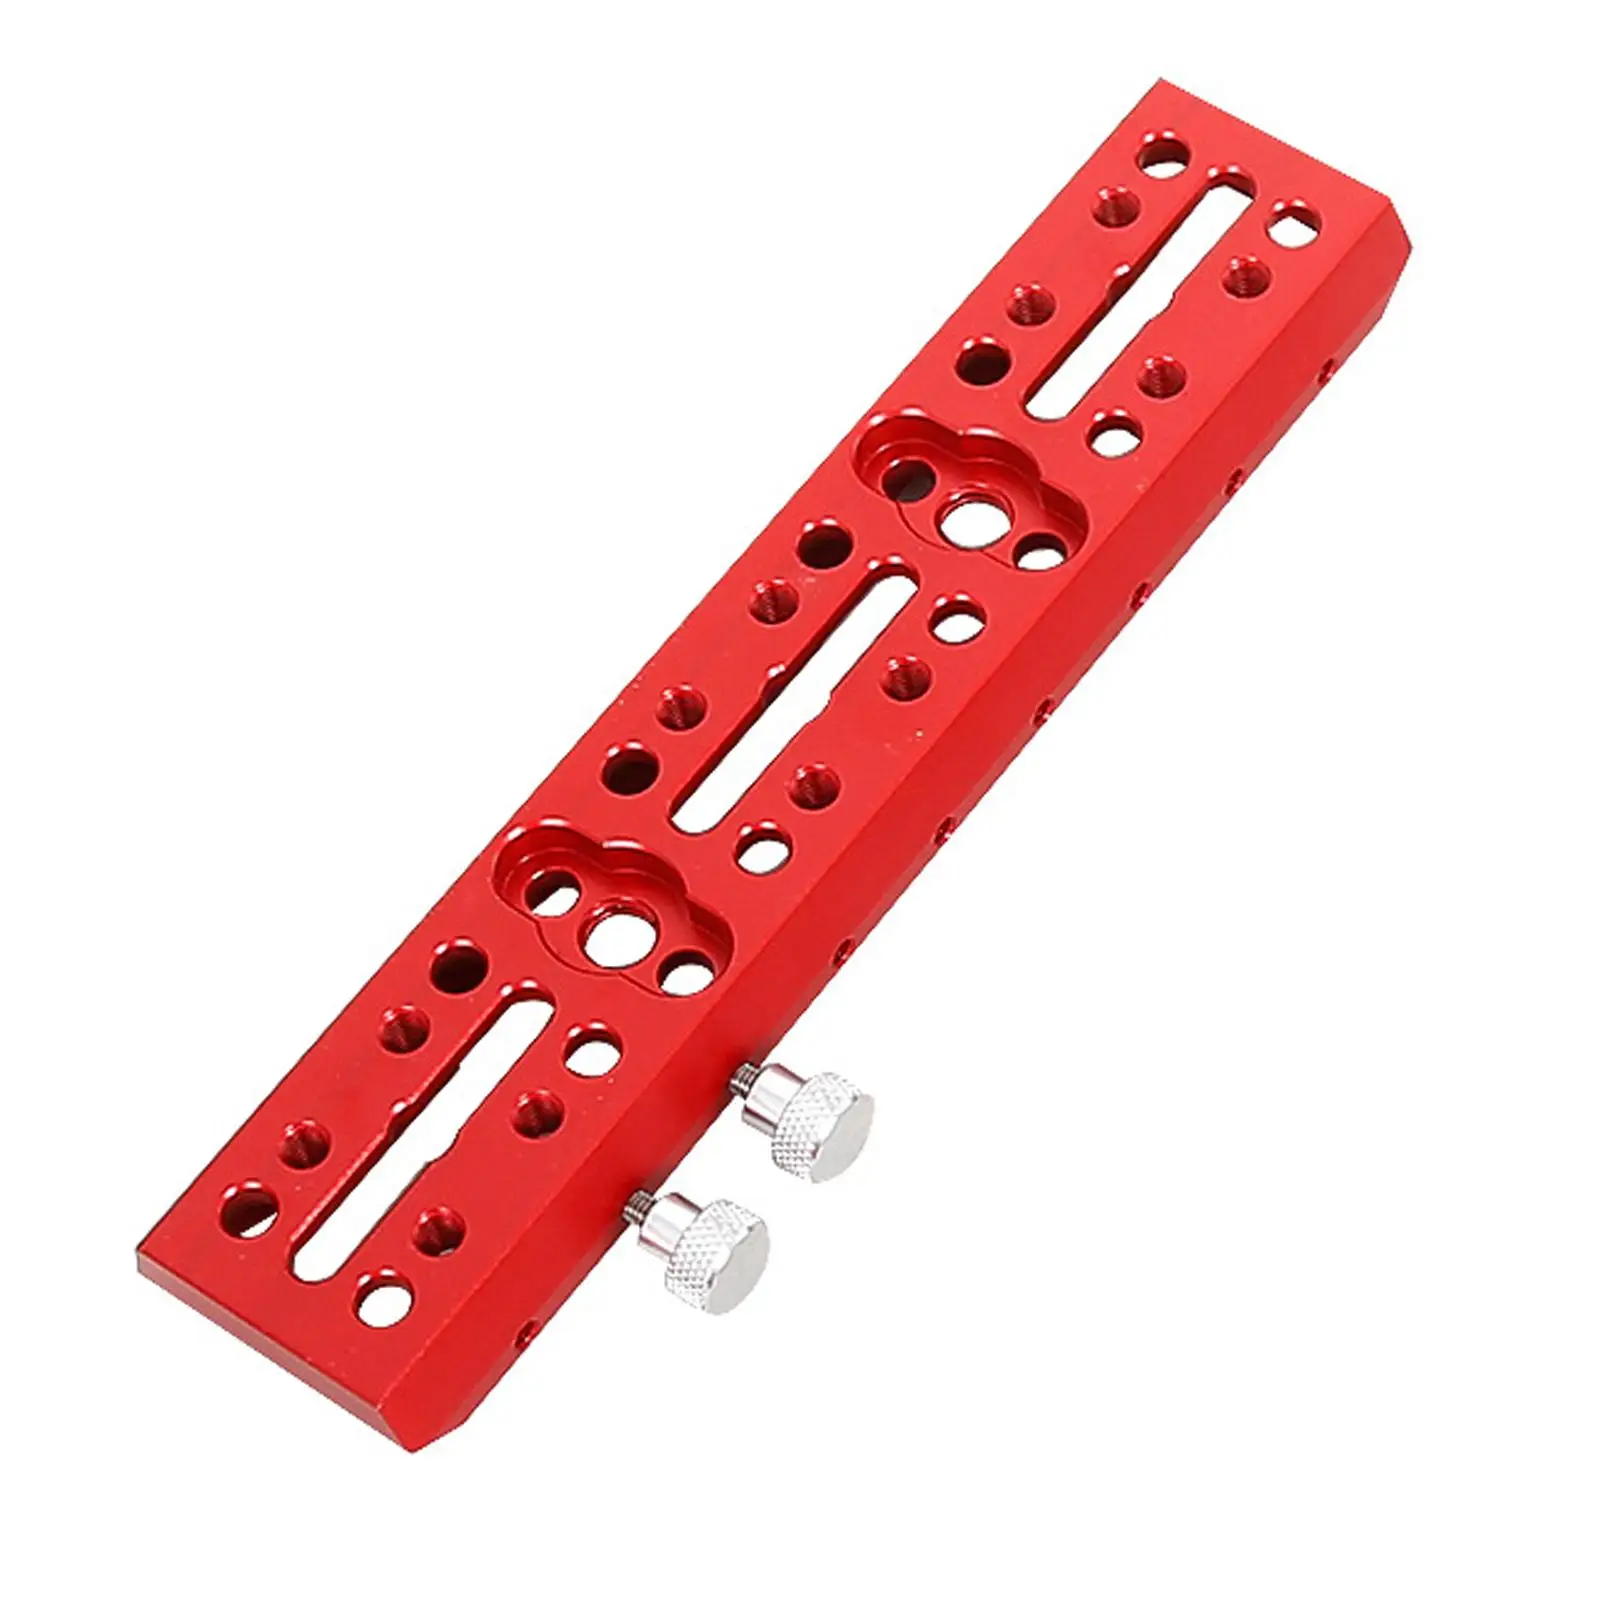 Dovetail Mounting Fixing Plate Standard Dovetail Plate for 2042 Repair Part